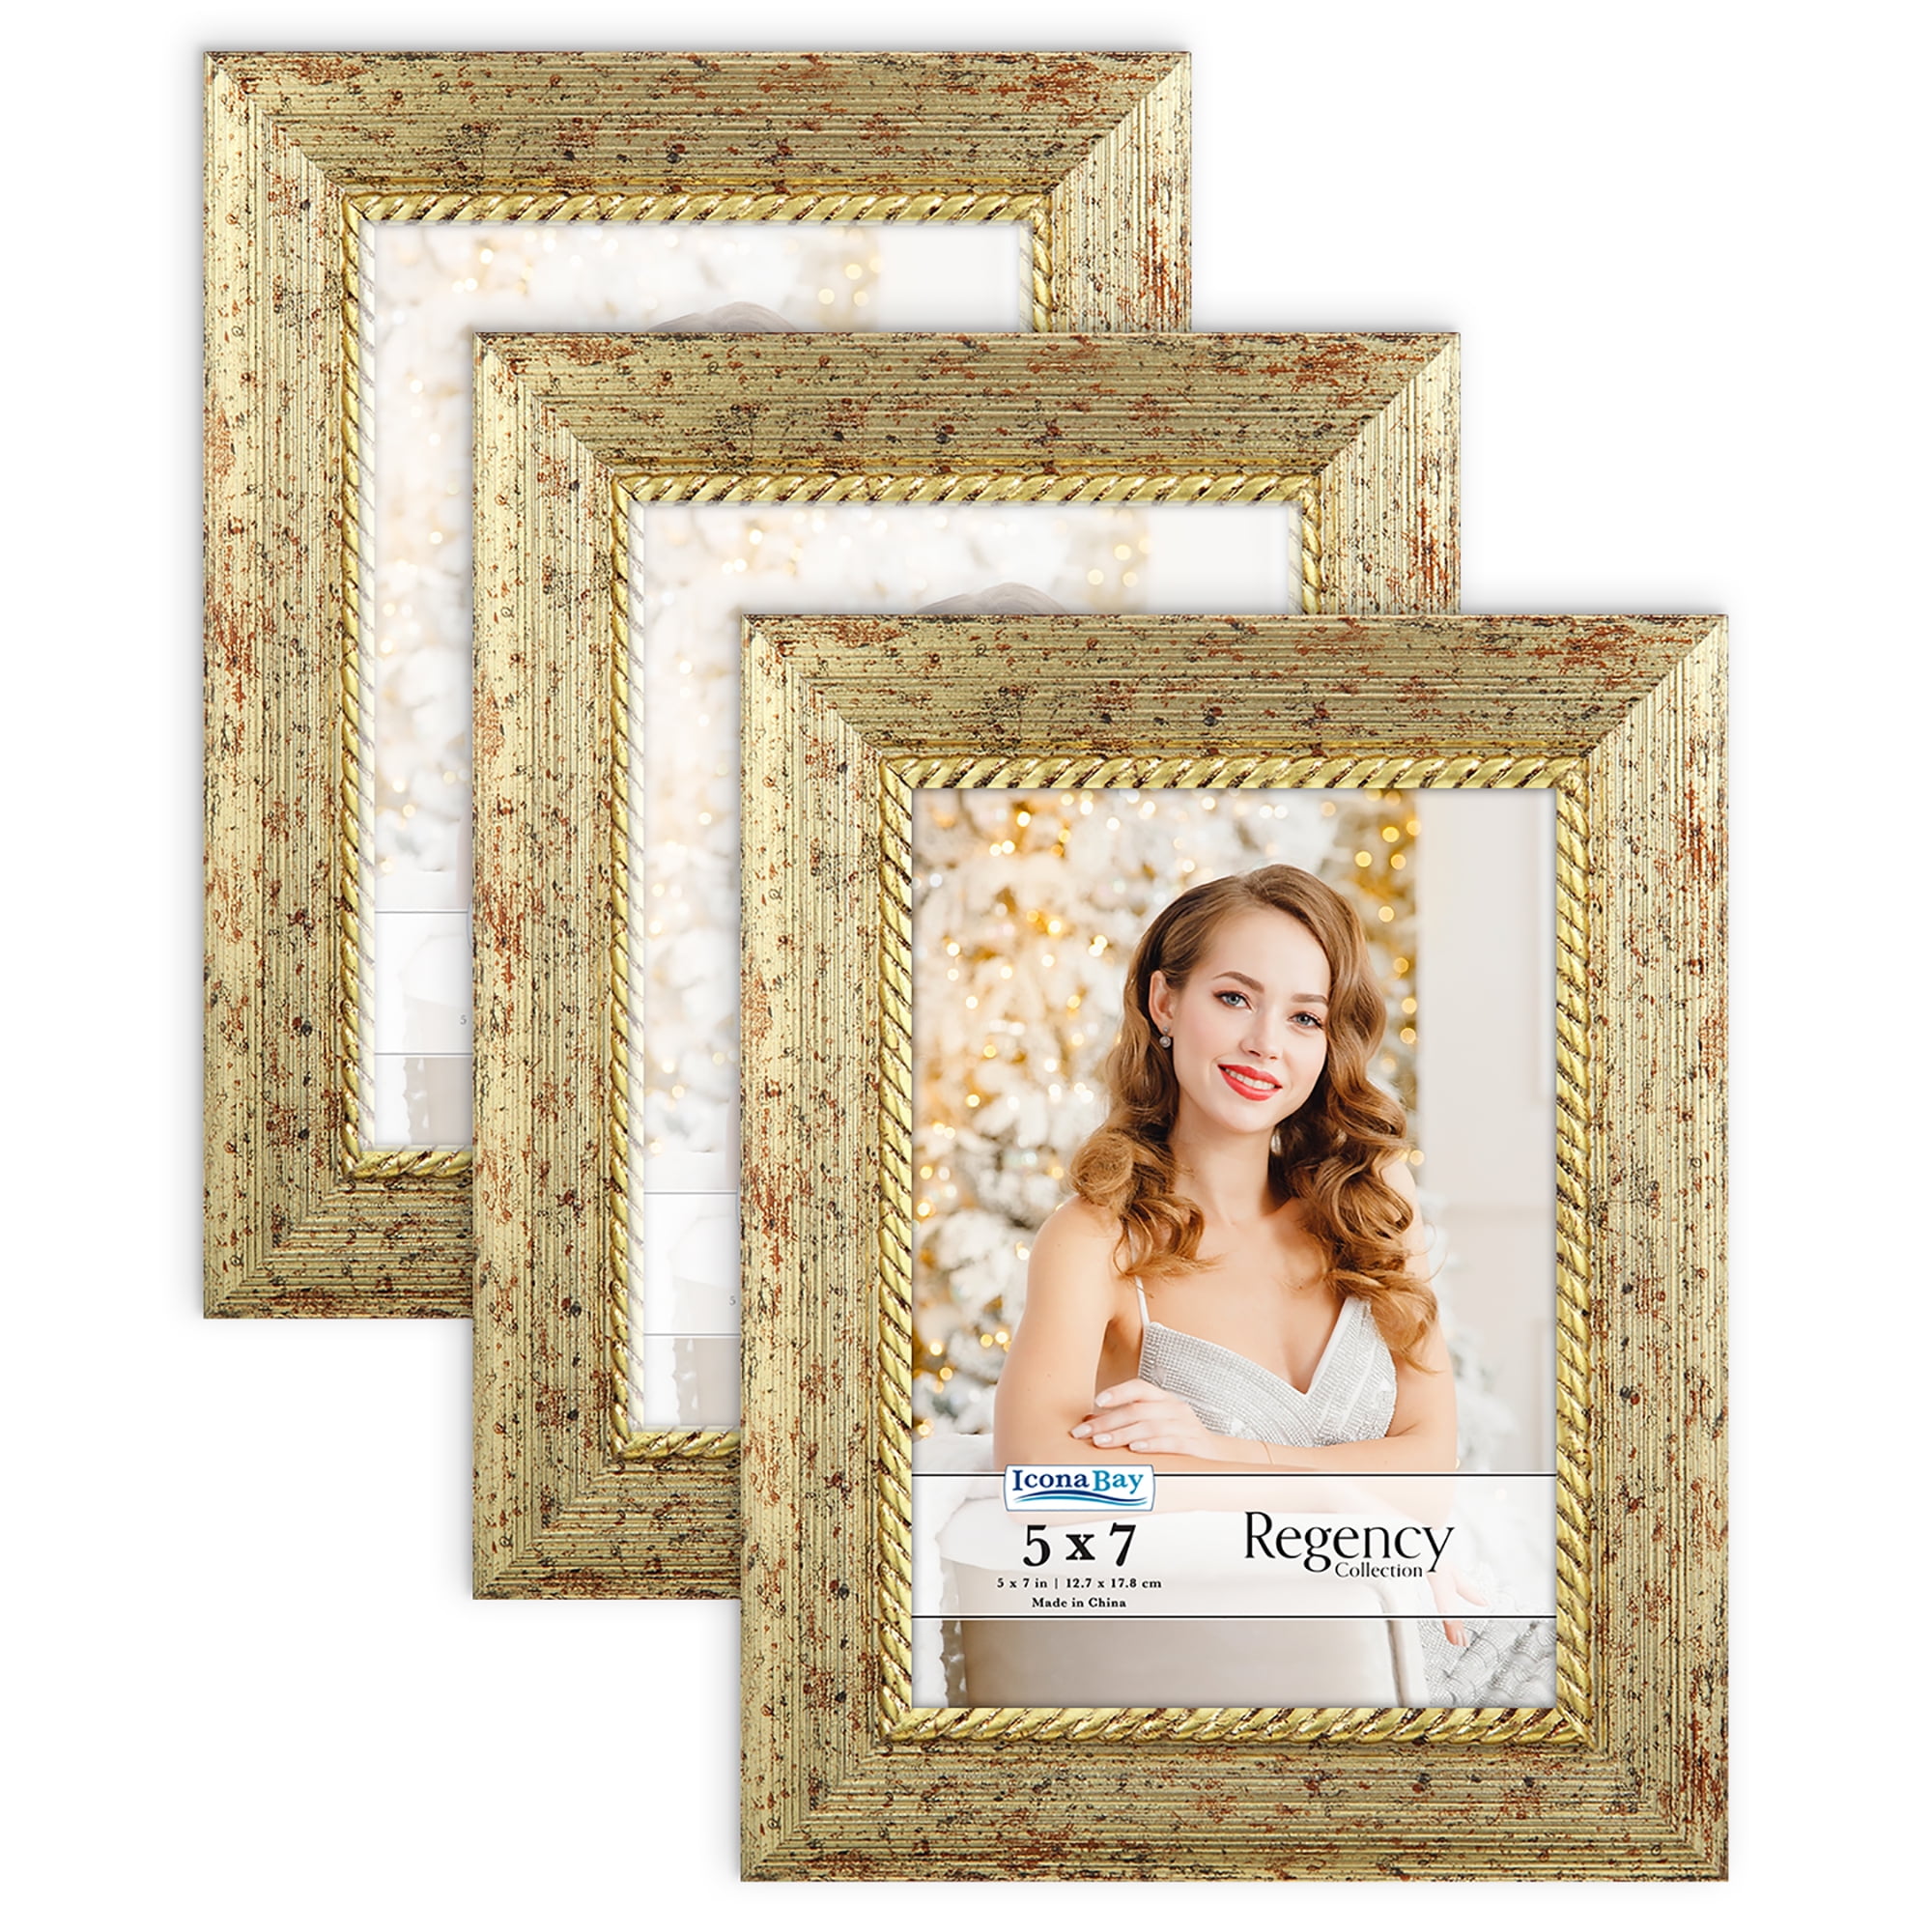 Icona Bay 5x7 Replacement Glass for Tabletop Picture Frames, 2 Pack, Size: 5 x 7